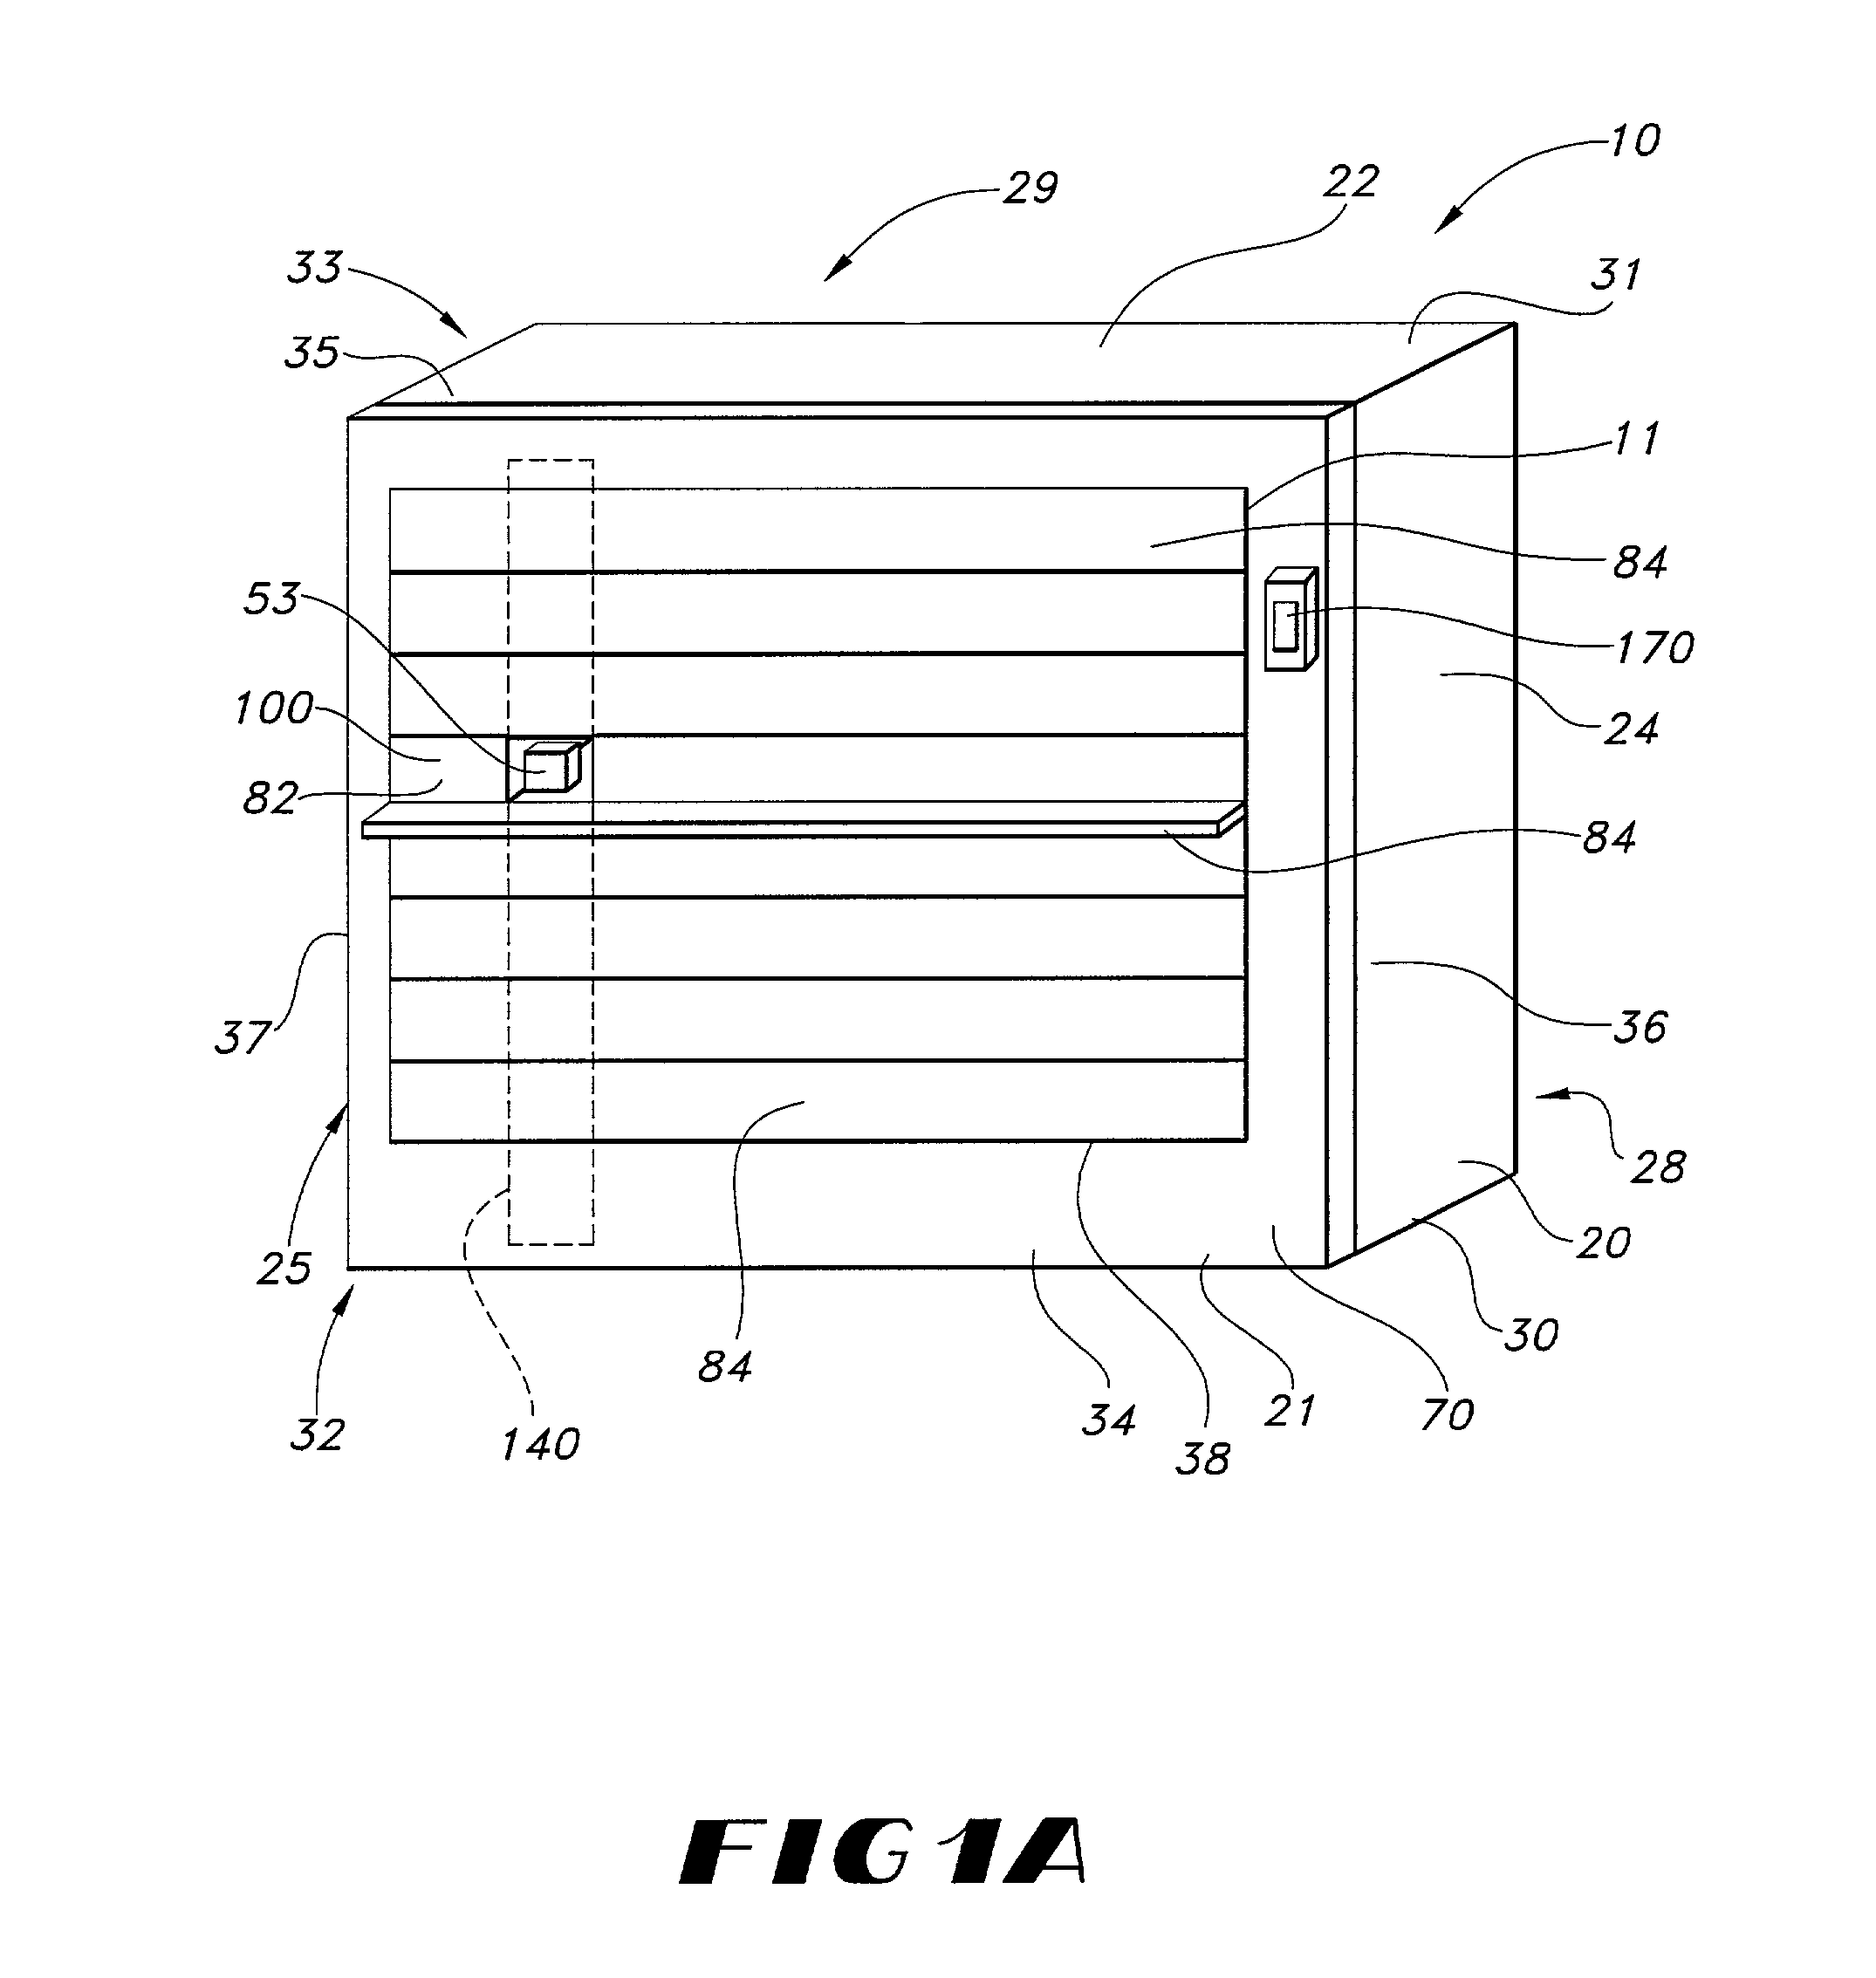 Garment dispensing and receiving apparatus having a removable cartridge body and a flexible dispensing door